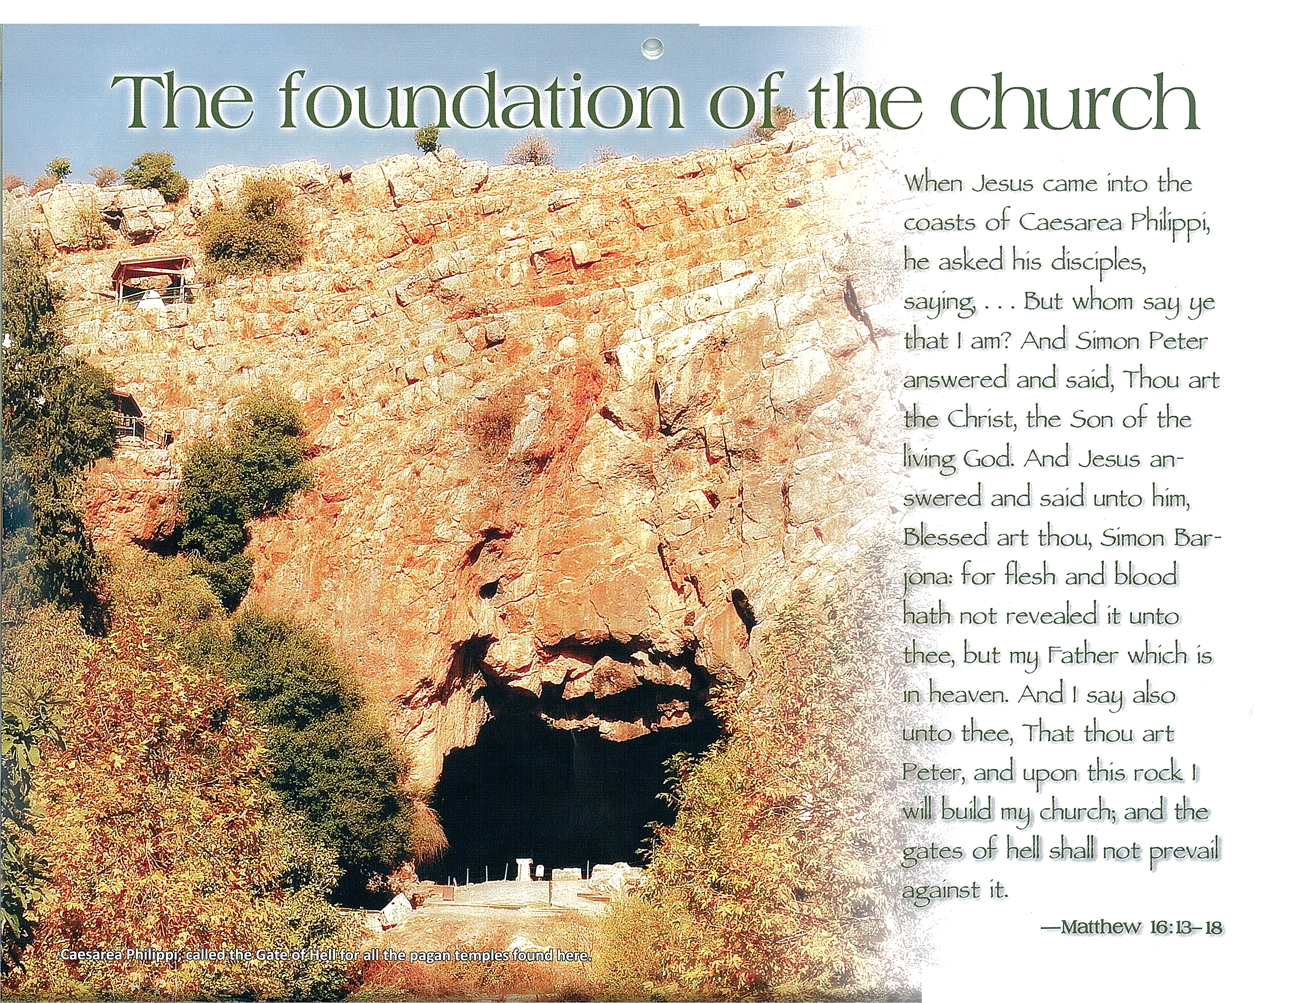 2010 Prophecy Calendar: July - The foundation of the church